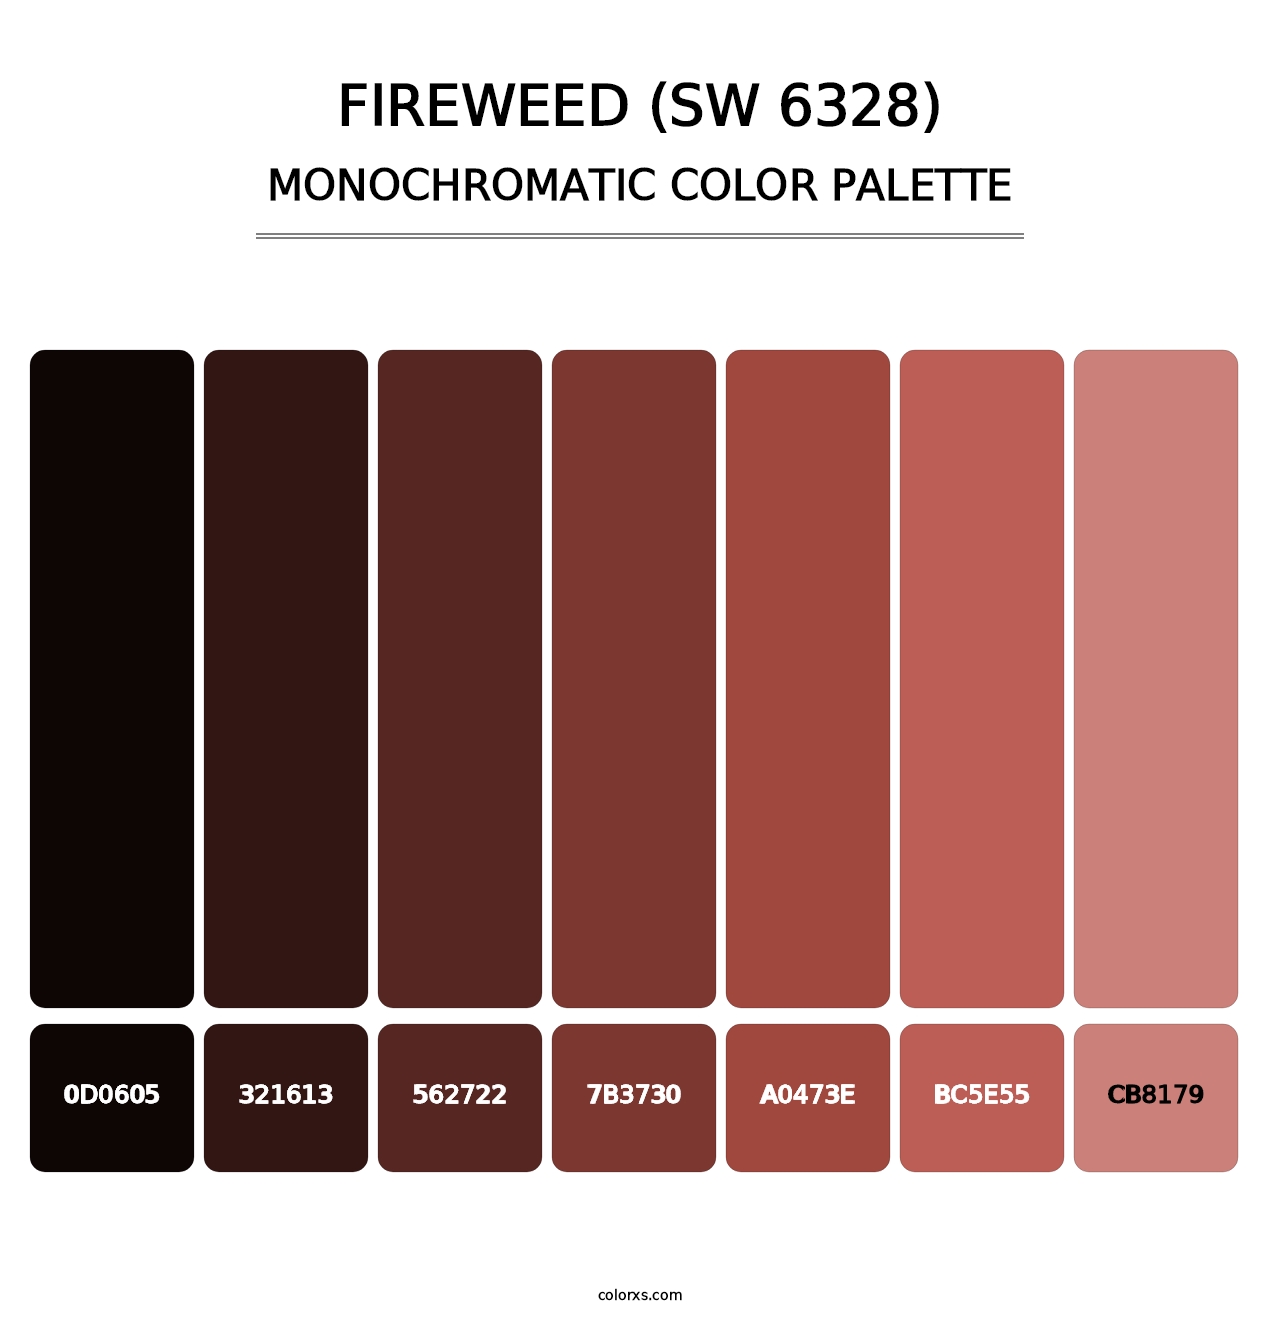 Fireweed (SW 6328) - Monochromatic Color Palette